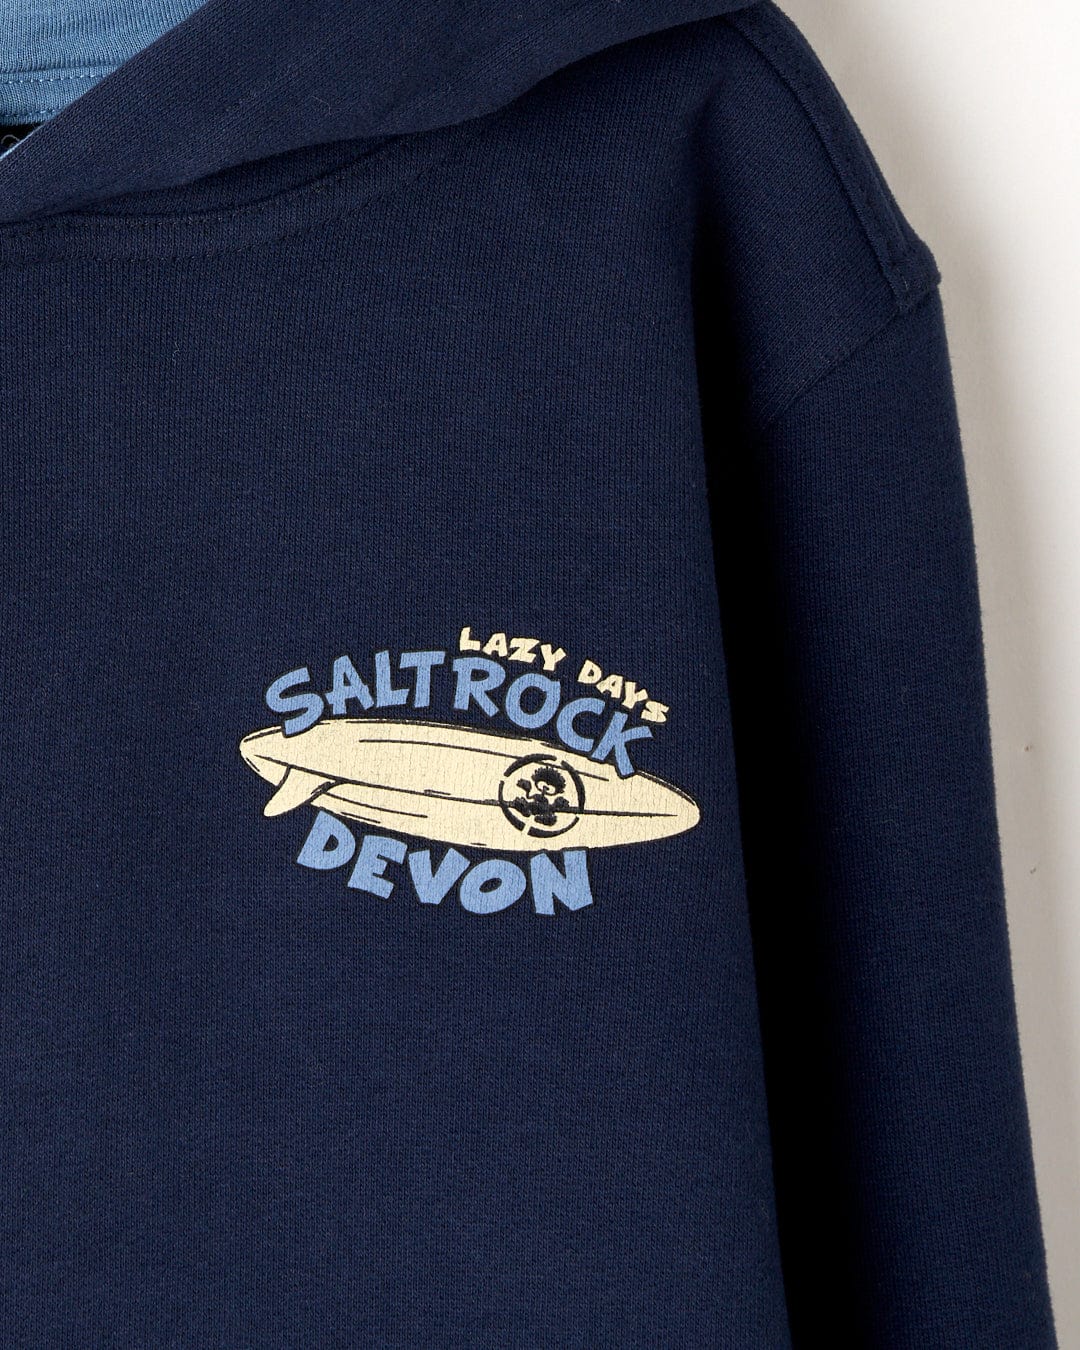 Dark blue hoodie with the printed text "lazy day Saltrock Devon" and a surfboard graphic on its sleeve. (Lazy Location Devon - Recycled Kids Hoodie - Blue by Saltrock)